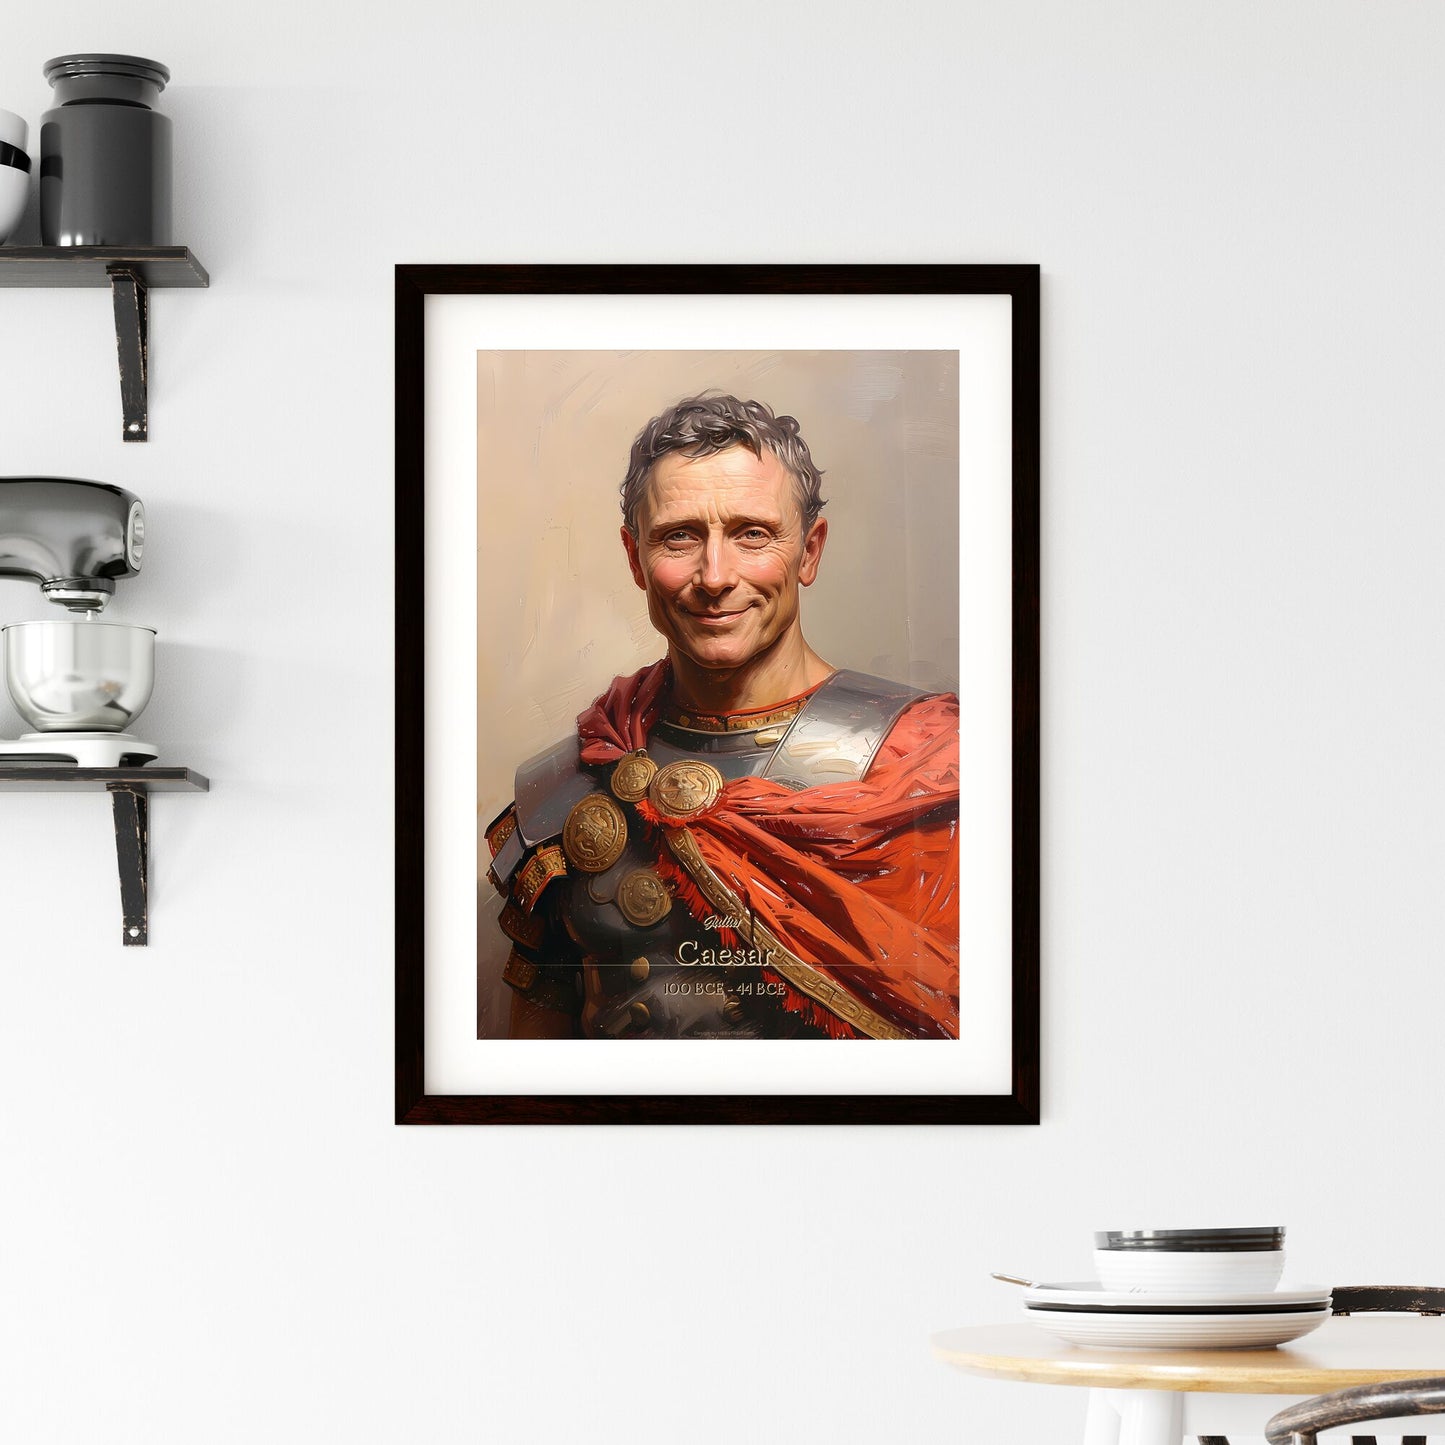 Julius, Caesar, 100 BCE - 44 BCE, A Poster of a man in armor with red cape Default Title